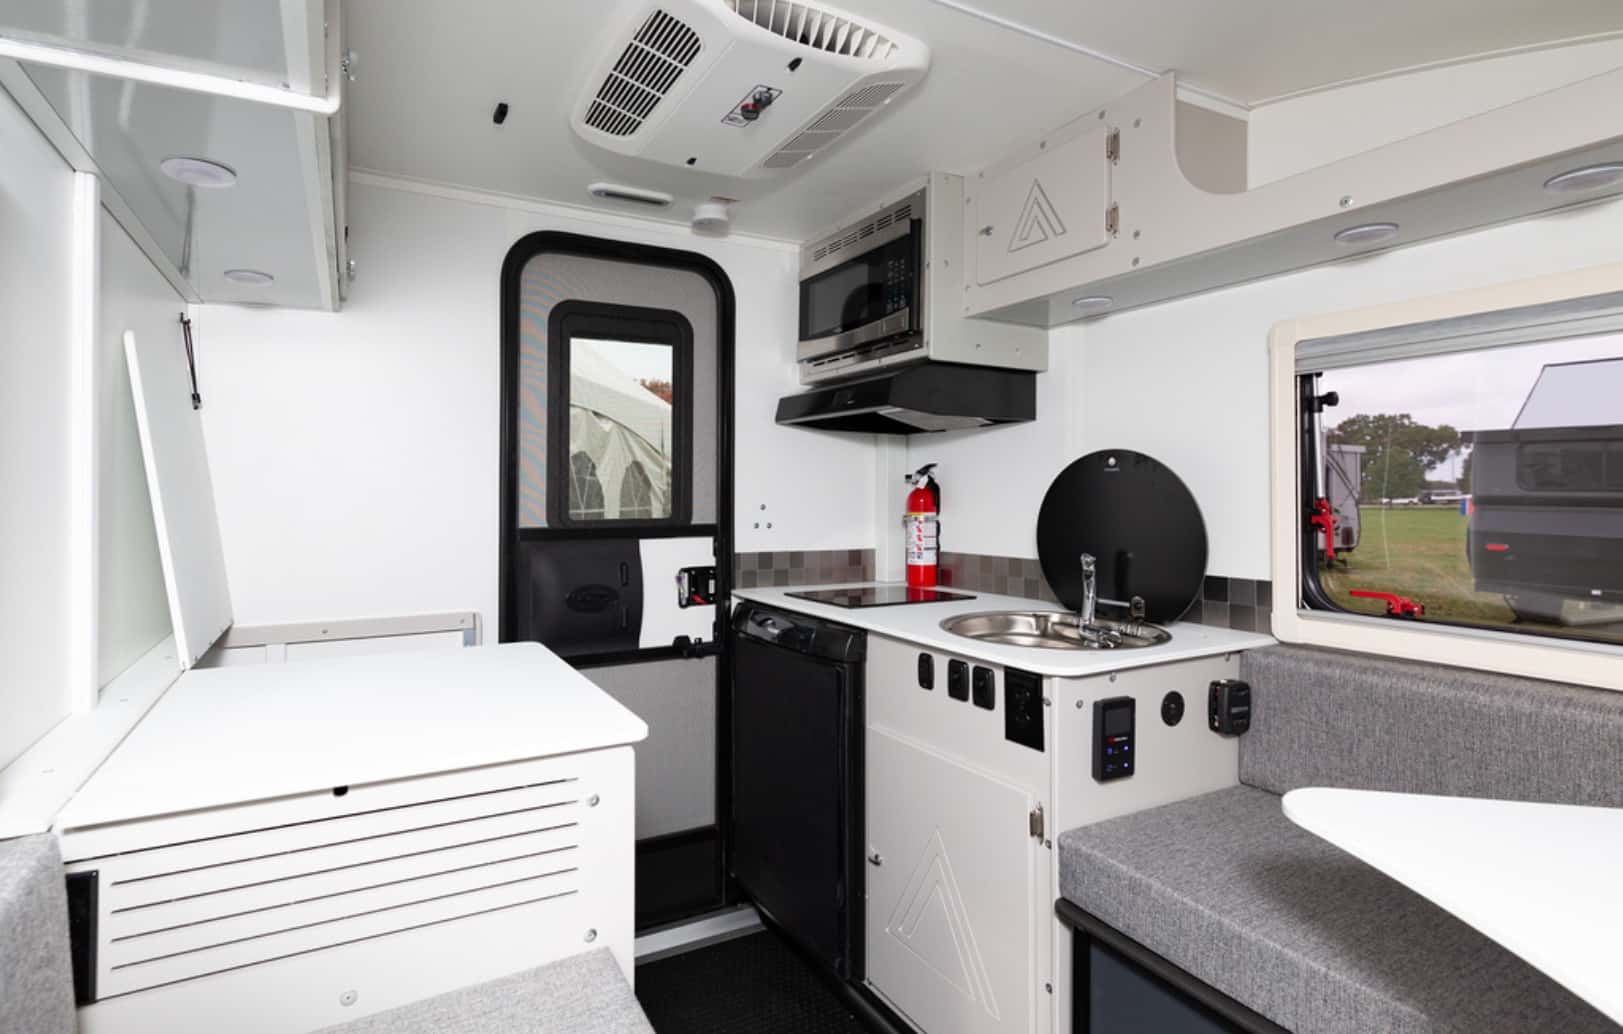 Interior of a modern camper van with a kitchenette and seating area.